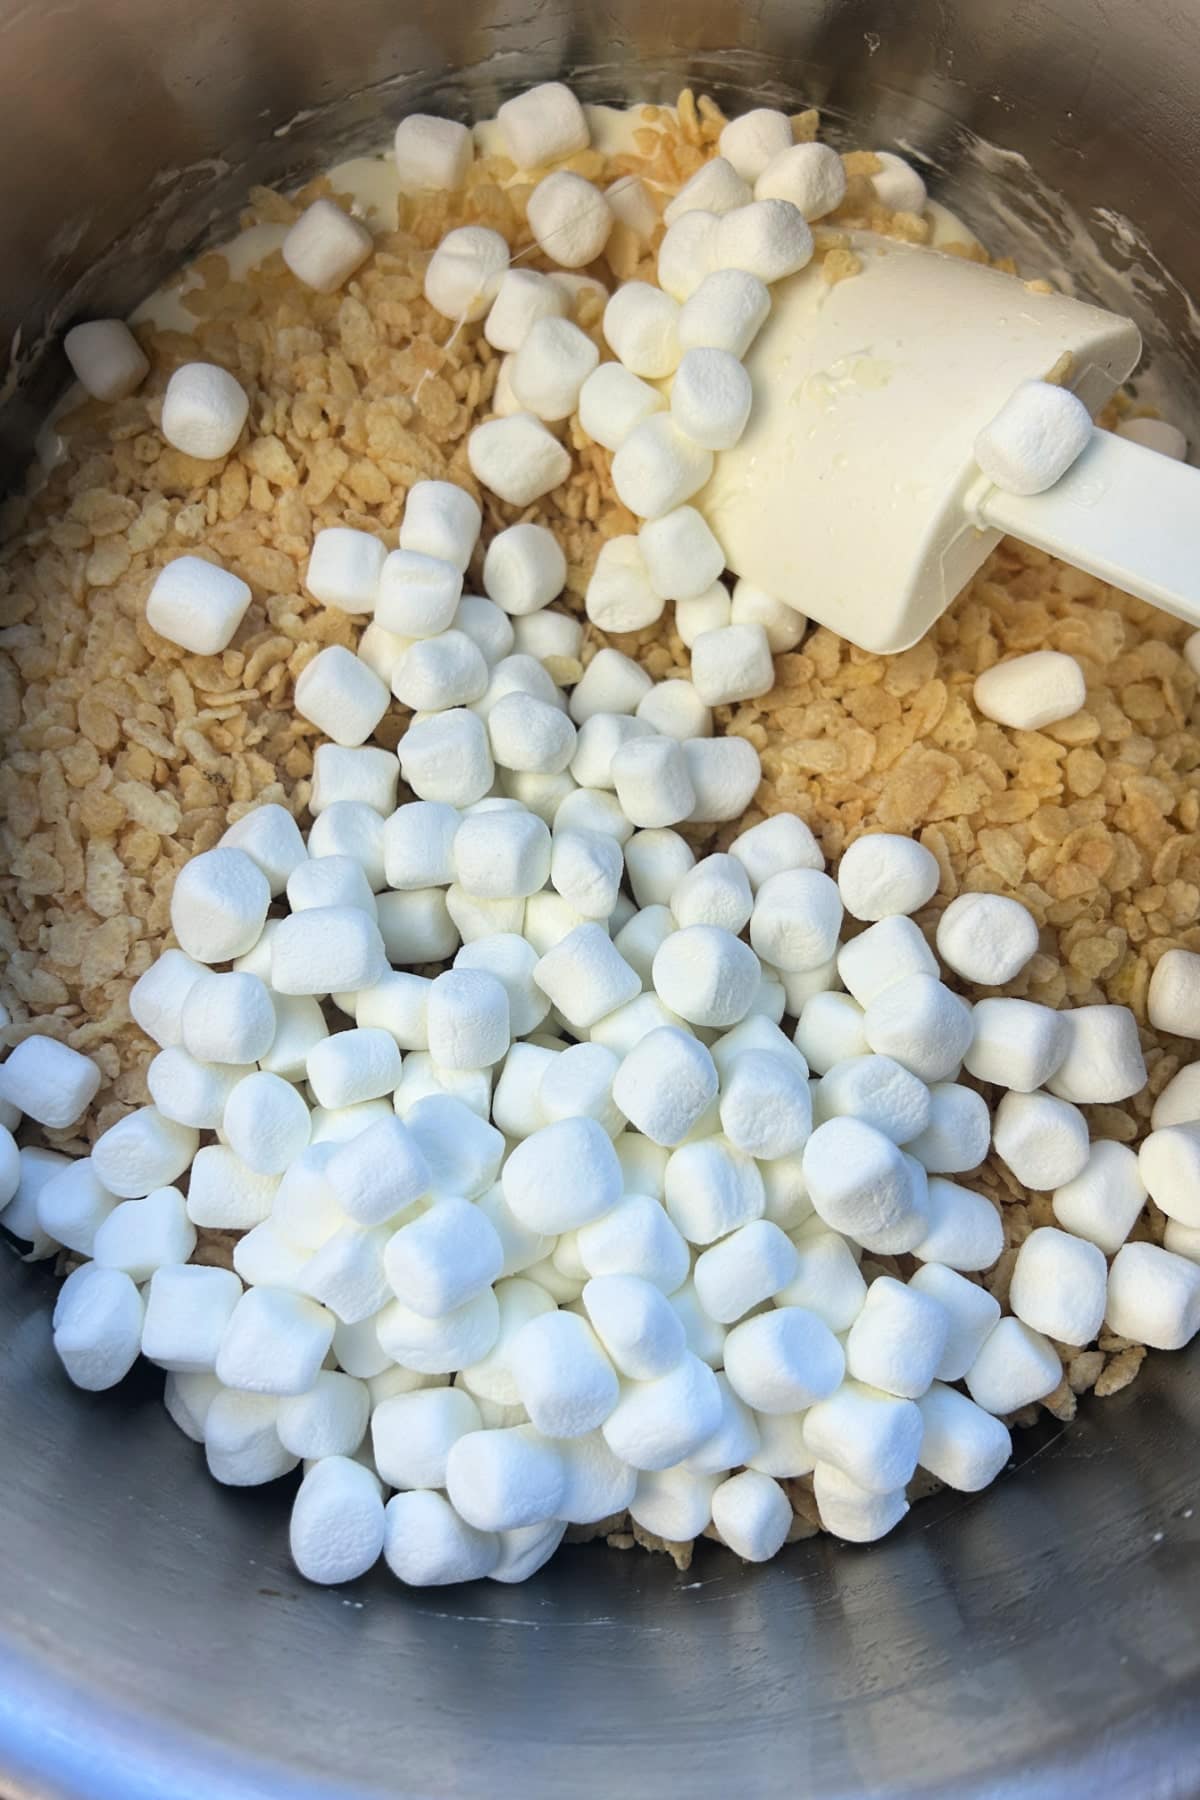 Ingredients for making Rice Krispie Treats, including cereal and marshmallows, in a mixing bowl with a spatula.